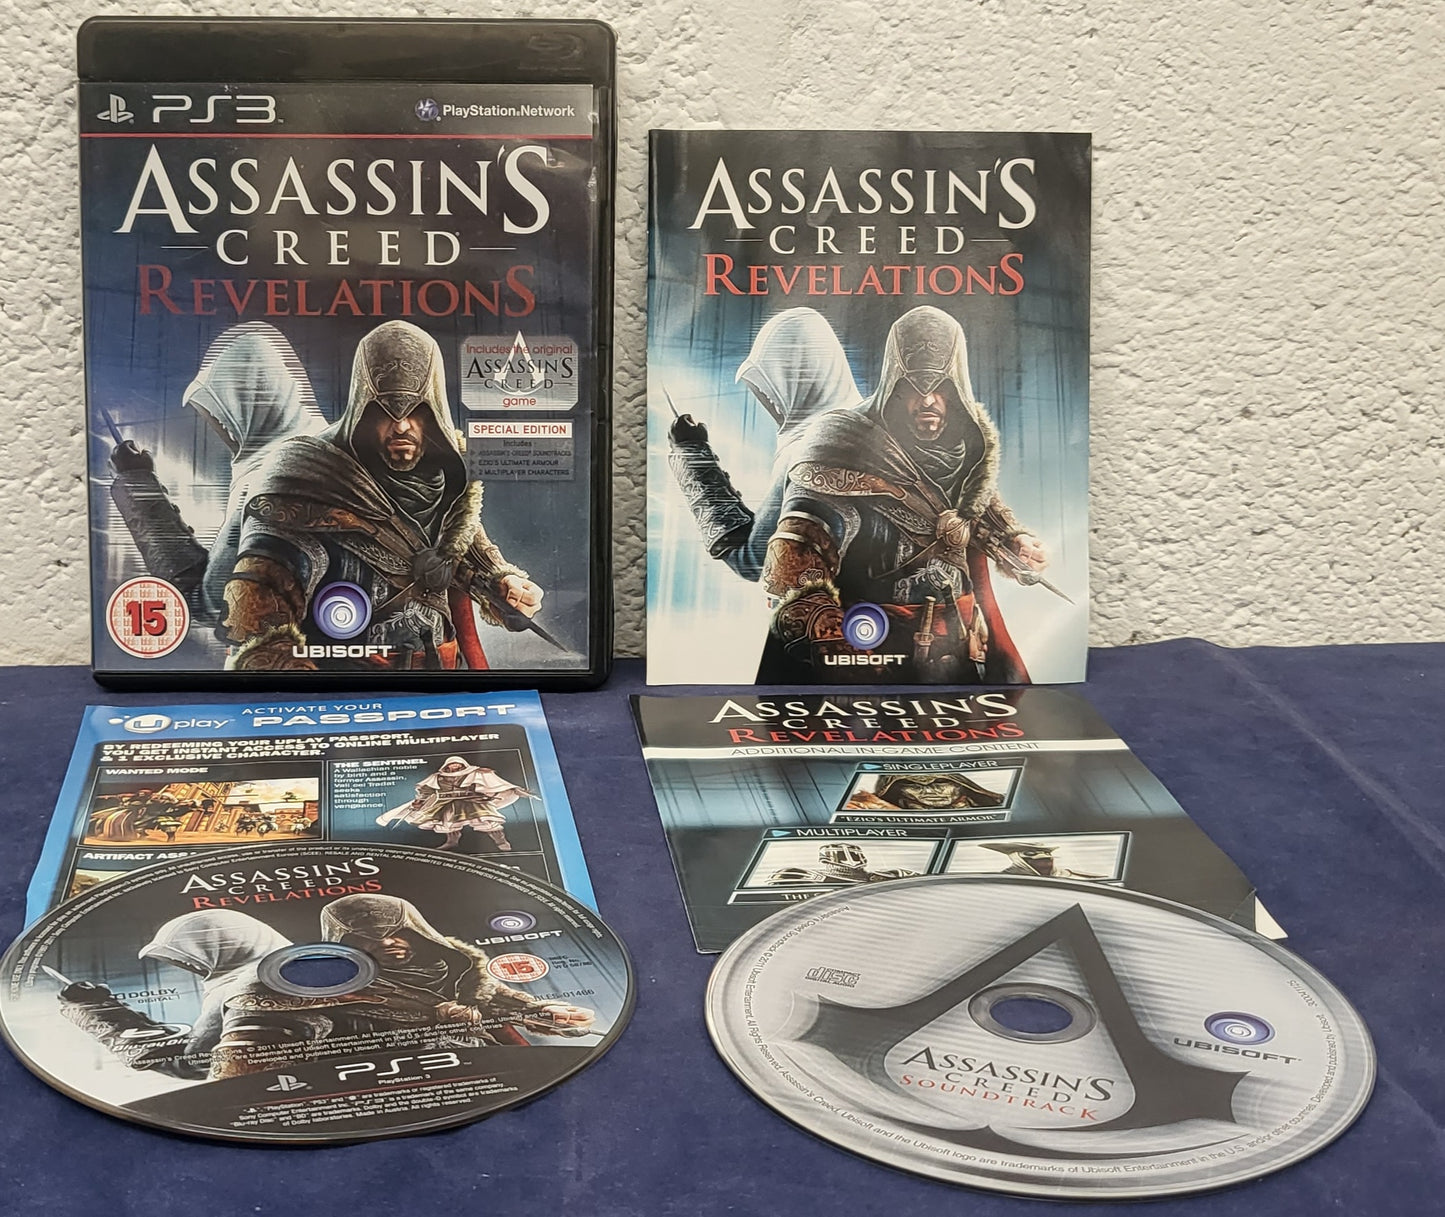 Assassin's Creed Revelations Special Edition with Soundtrack Sony Playstation 3 (PS3)